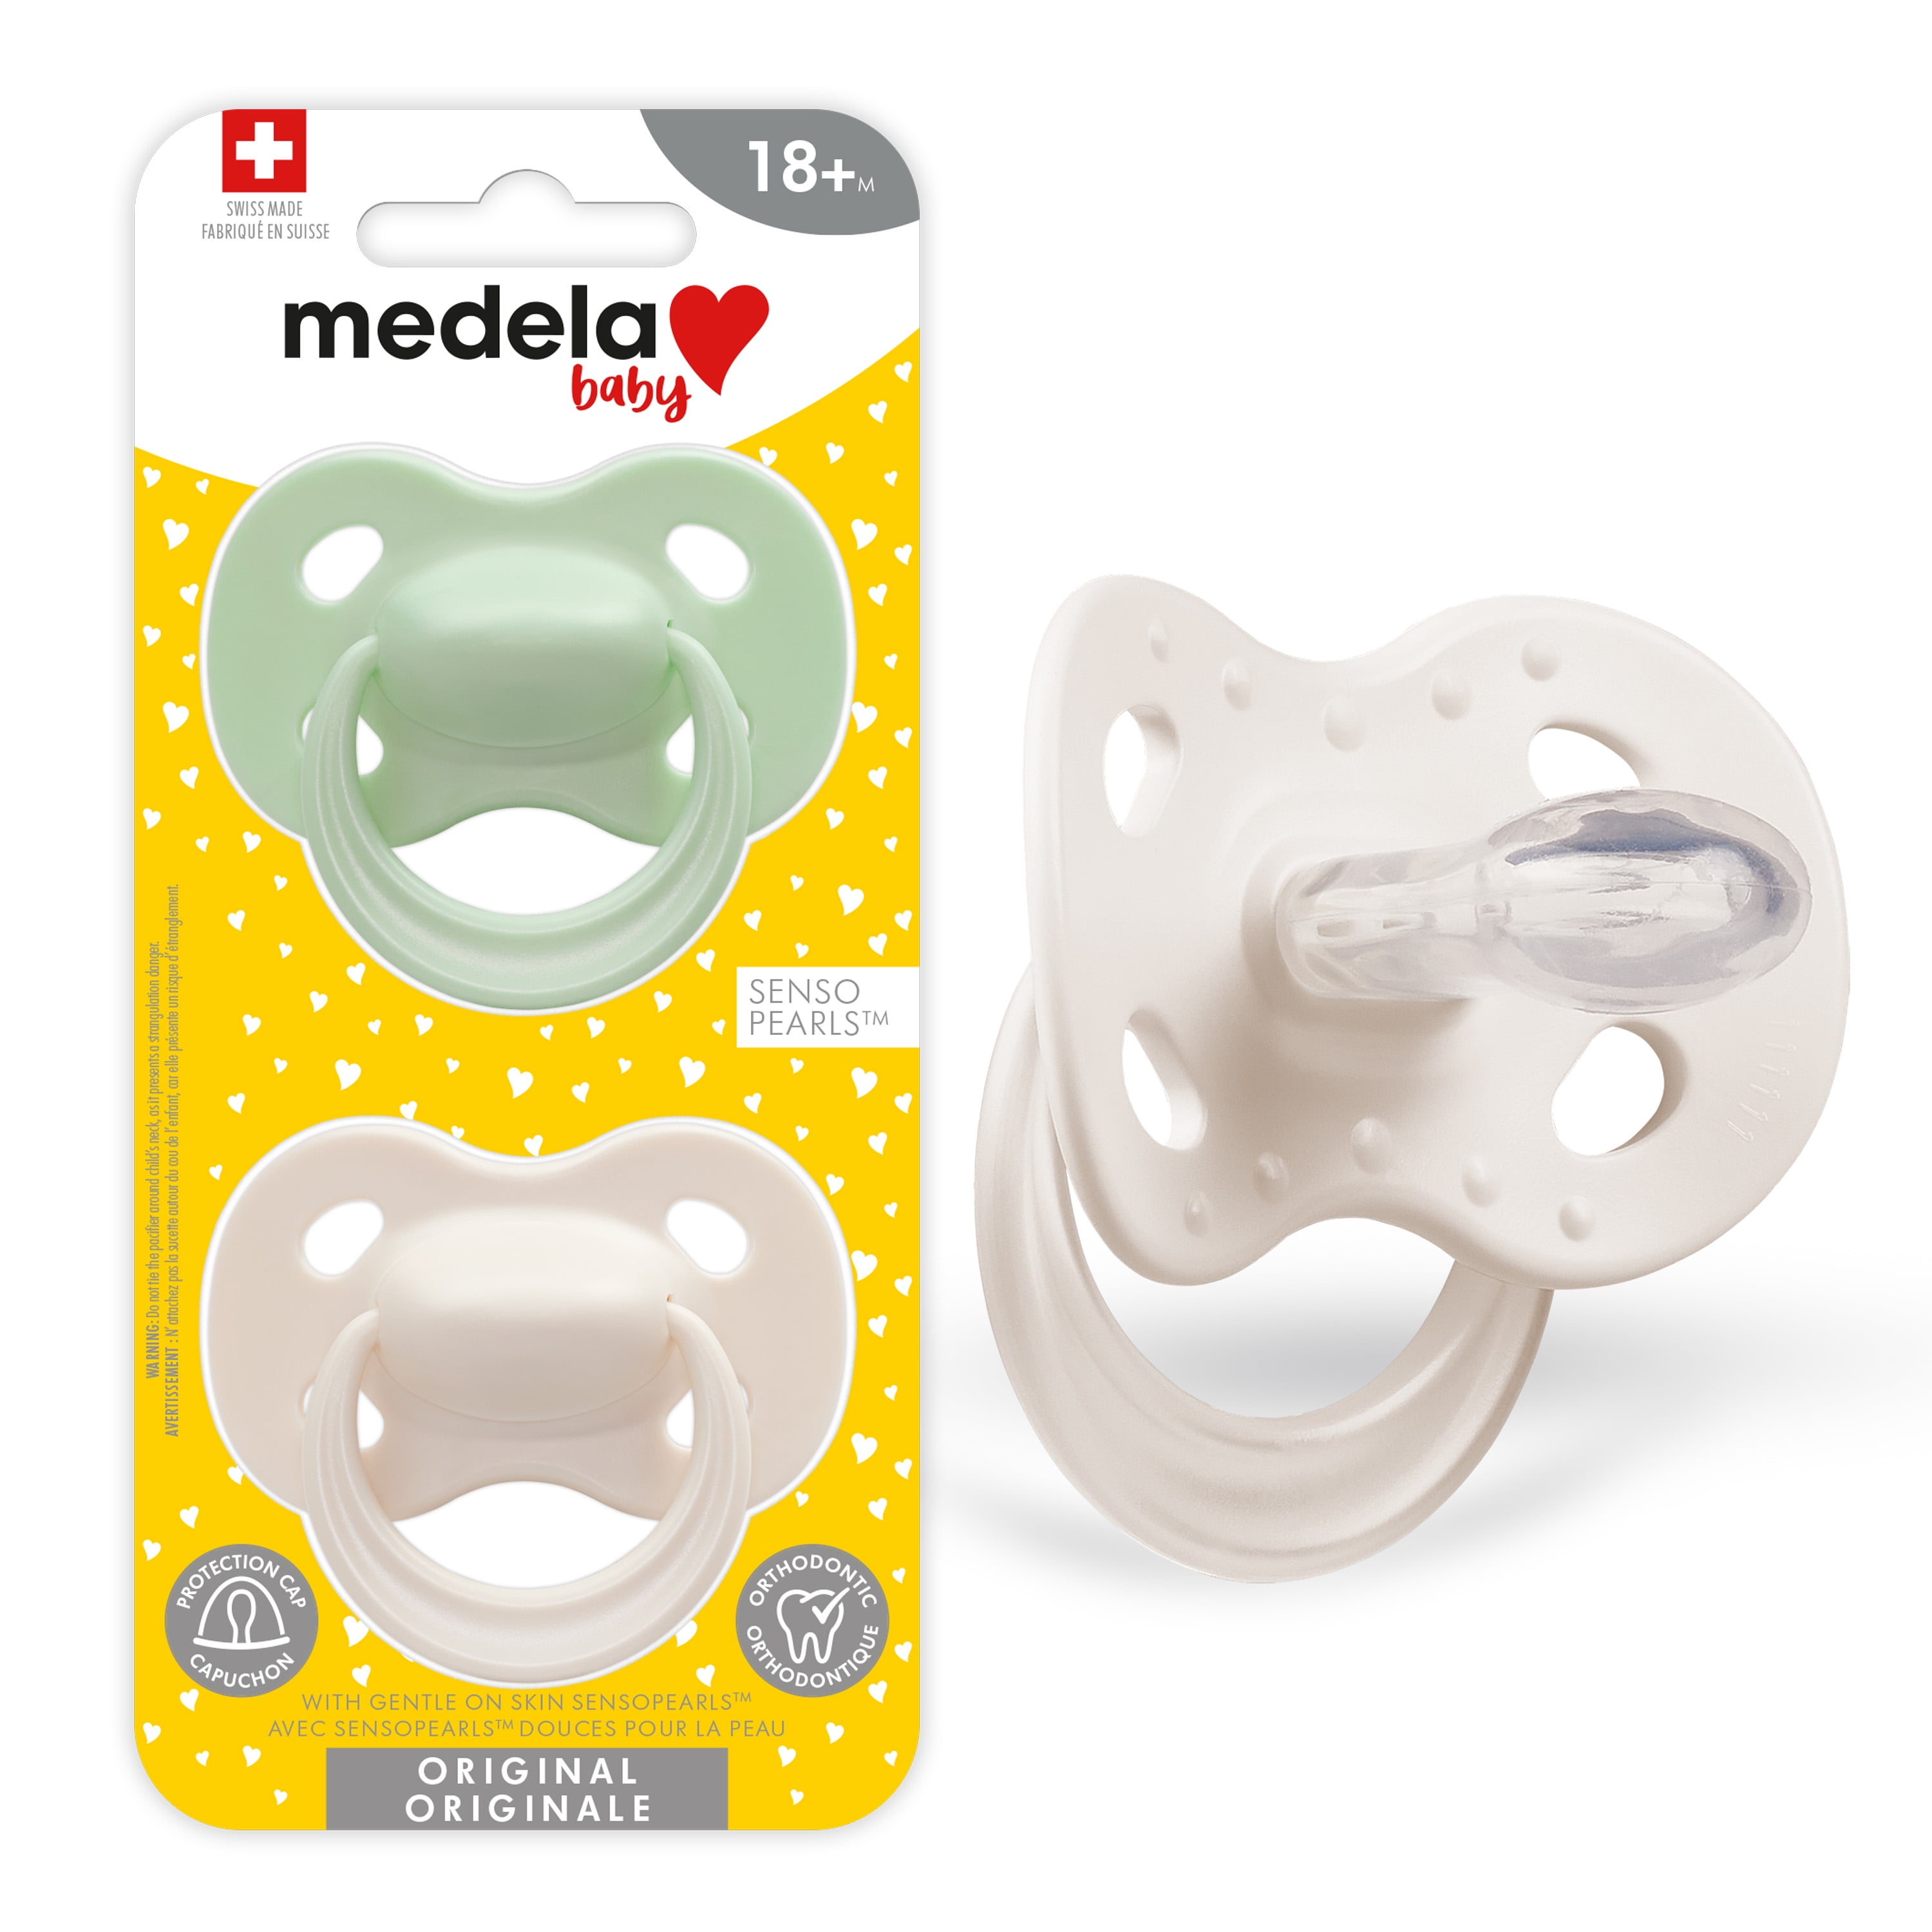 Medela Baby Pastel Pacifier for Months, Perfect for Everyday Use, BPA-Free, & Orthodontic, Pacifiers, 2-Pack, Jade Green/Calm Grey - Walmart.com